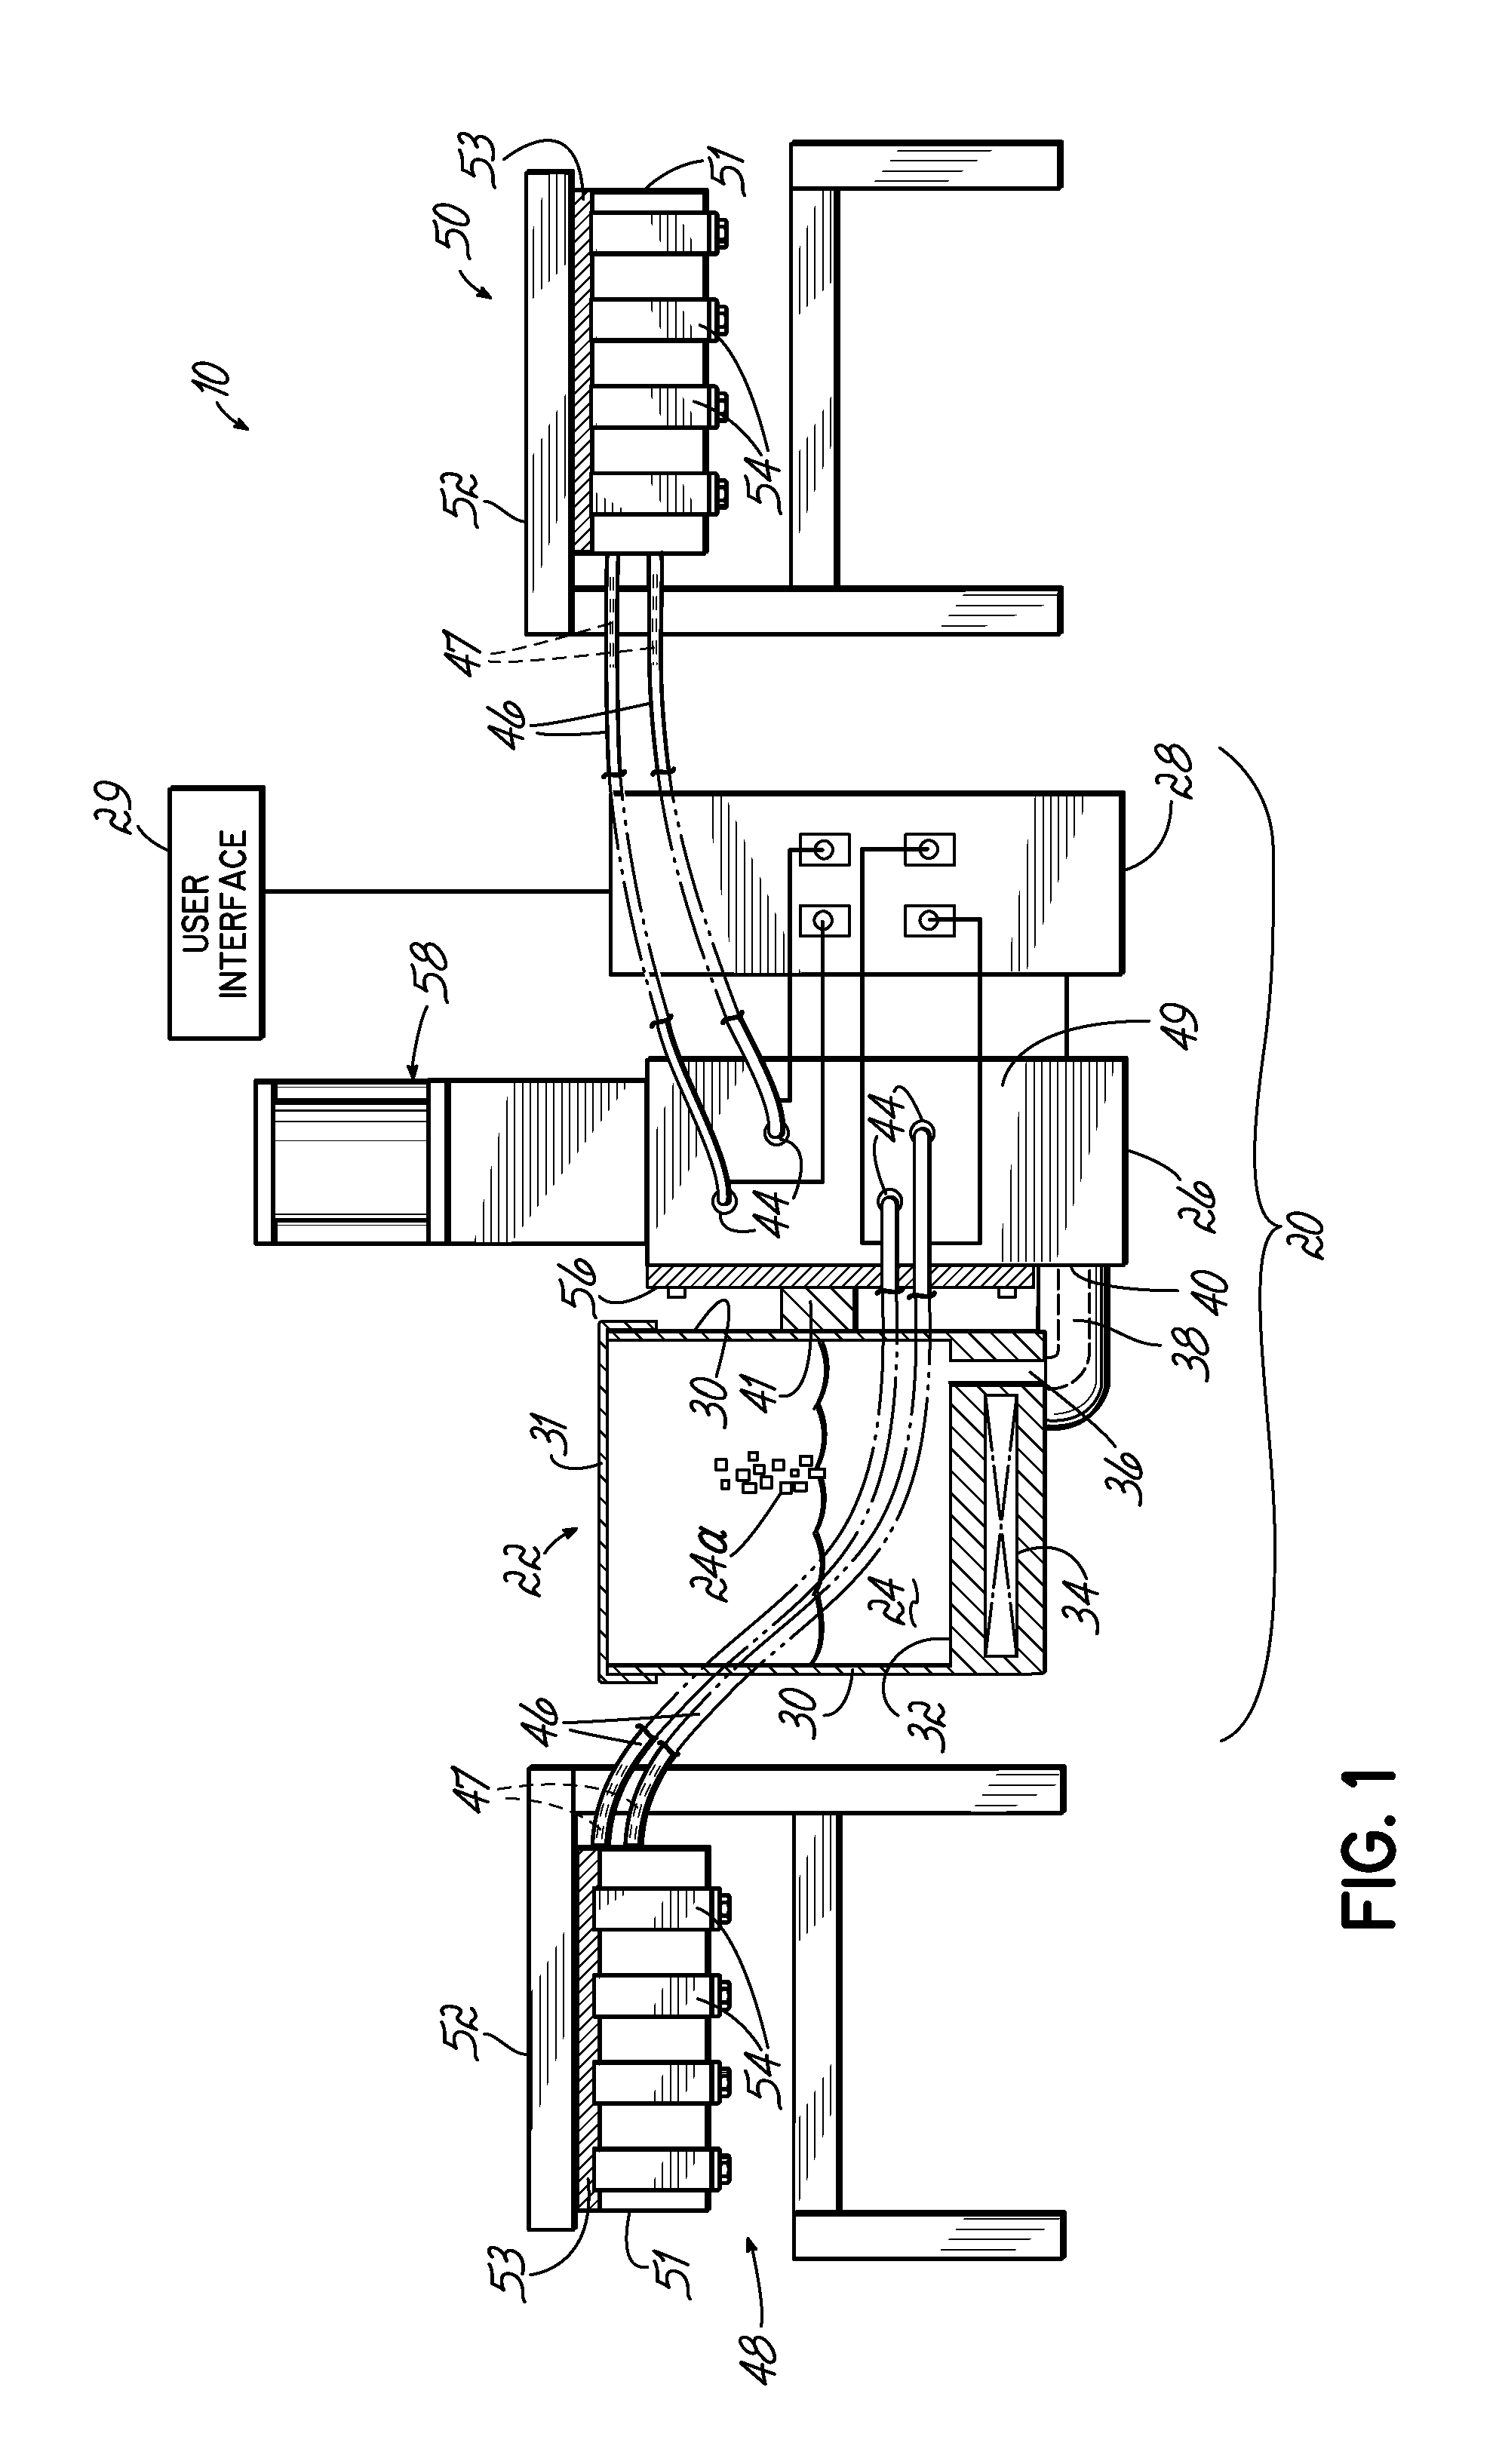 Hot melt dispensing unit and method with integrated flow control